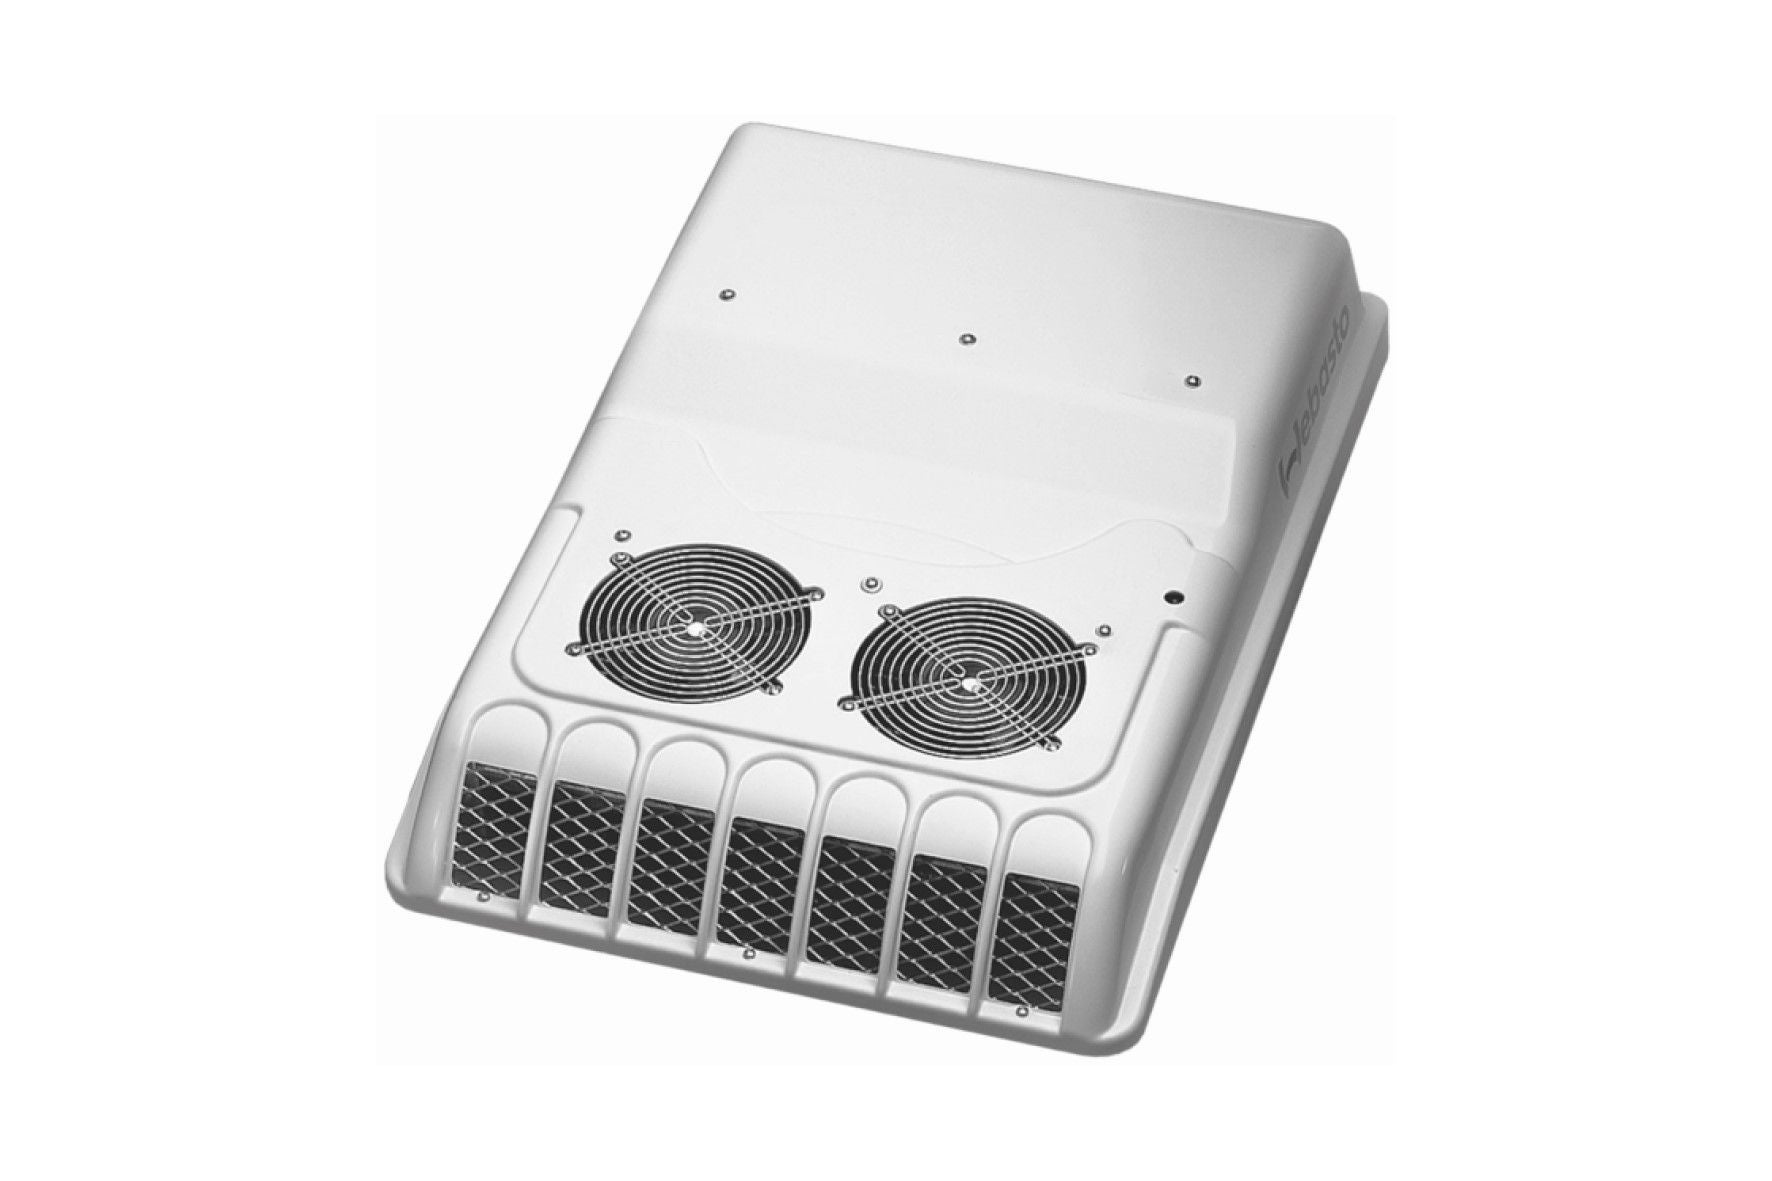 Product picture of Webasto rooftop air-conditioning system model Compact Cooler 4E